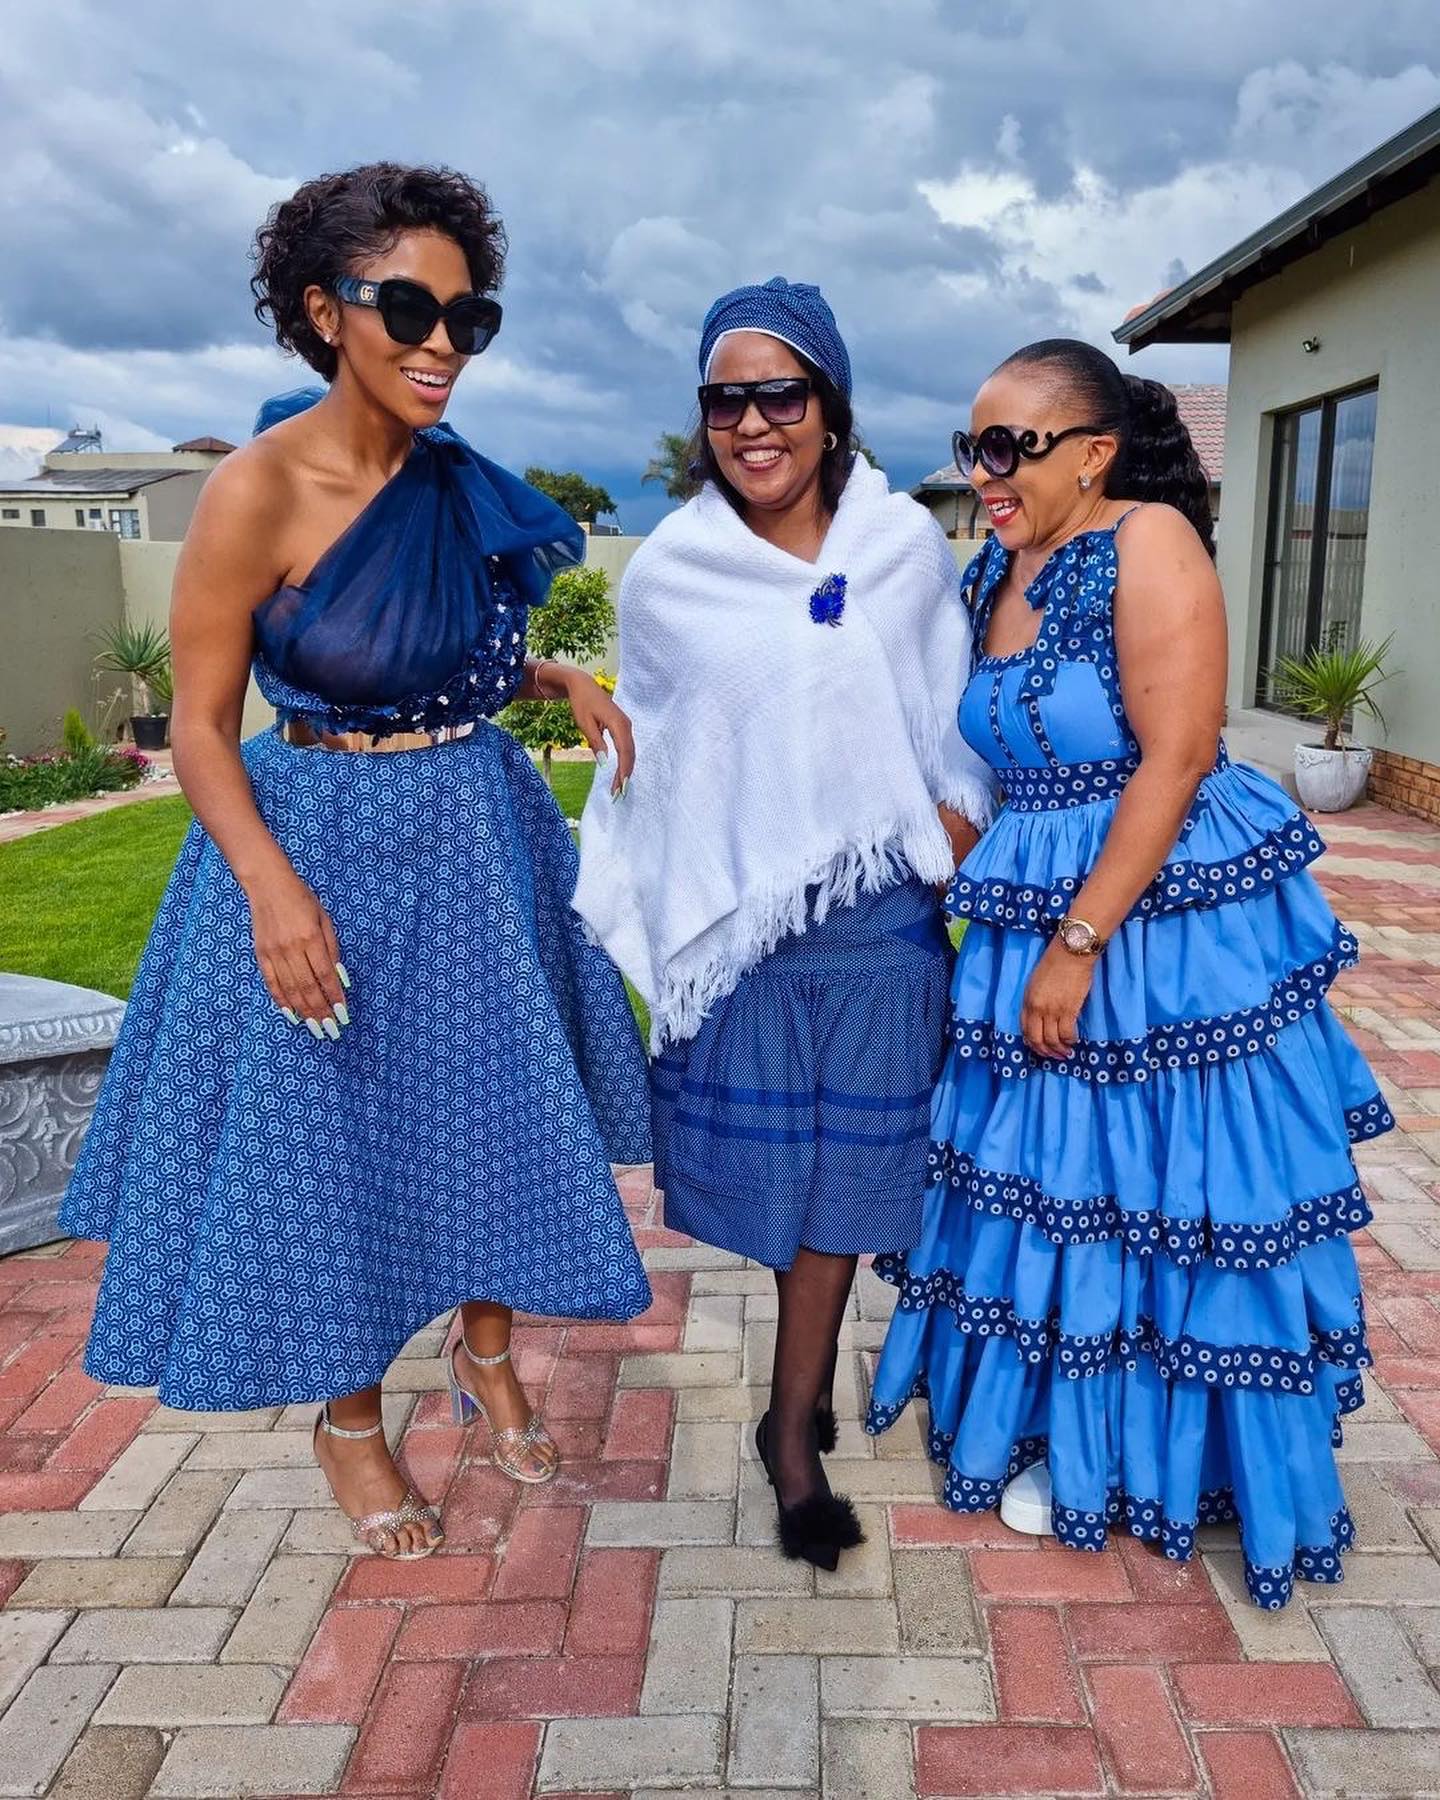 The Best South African Tswana Conventional Dresses For Wedding 15